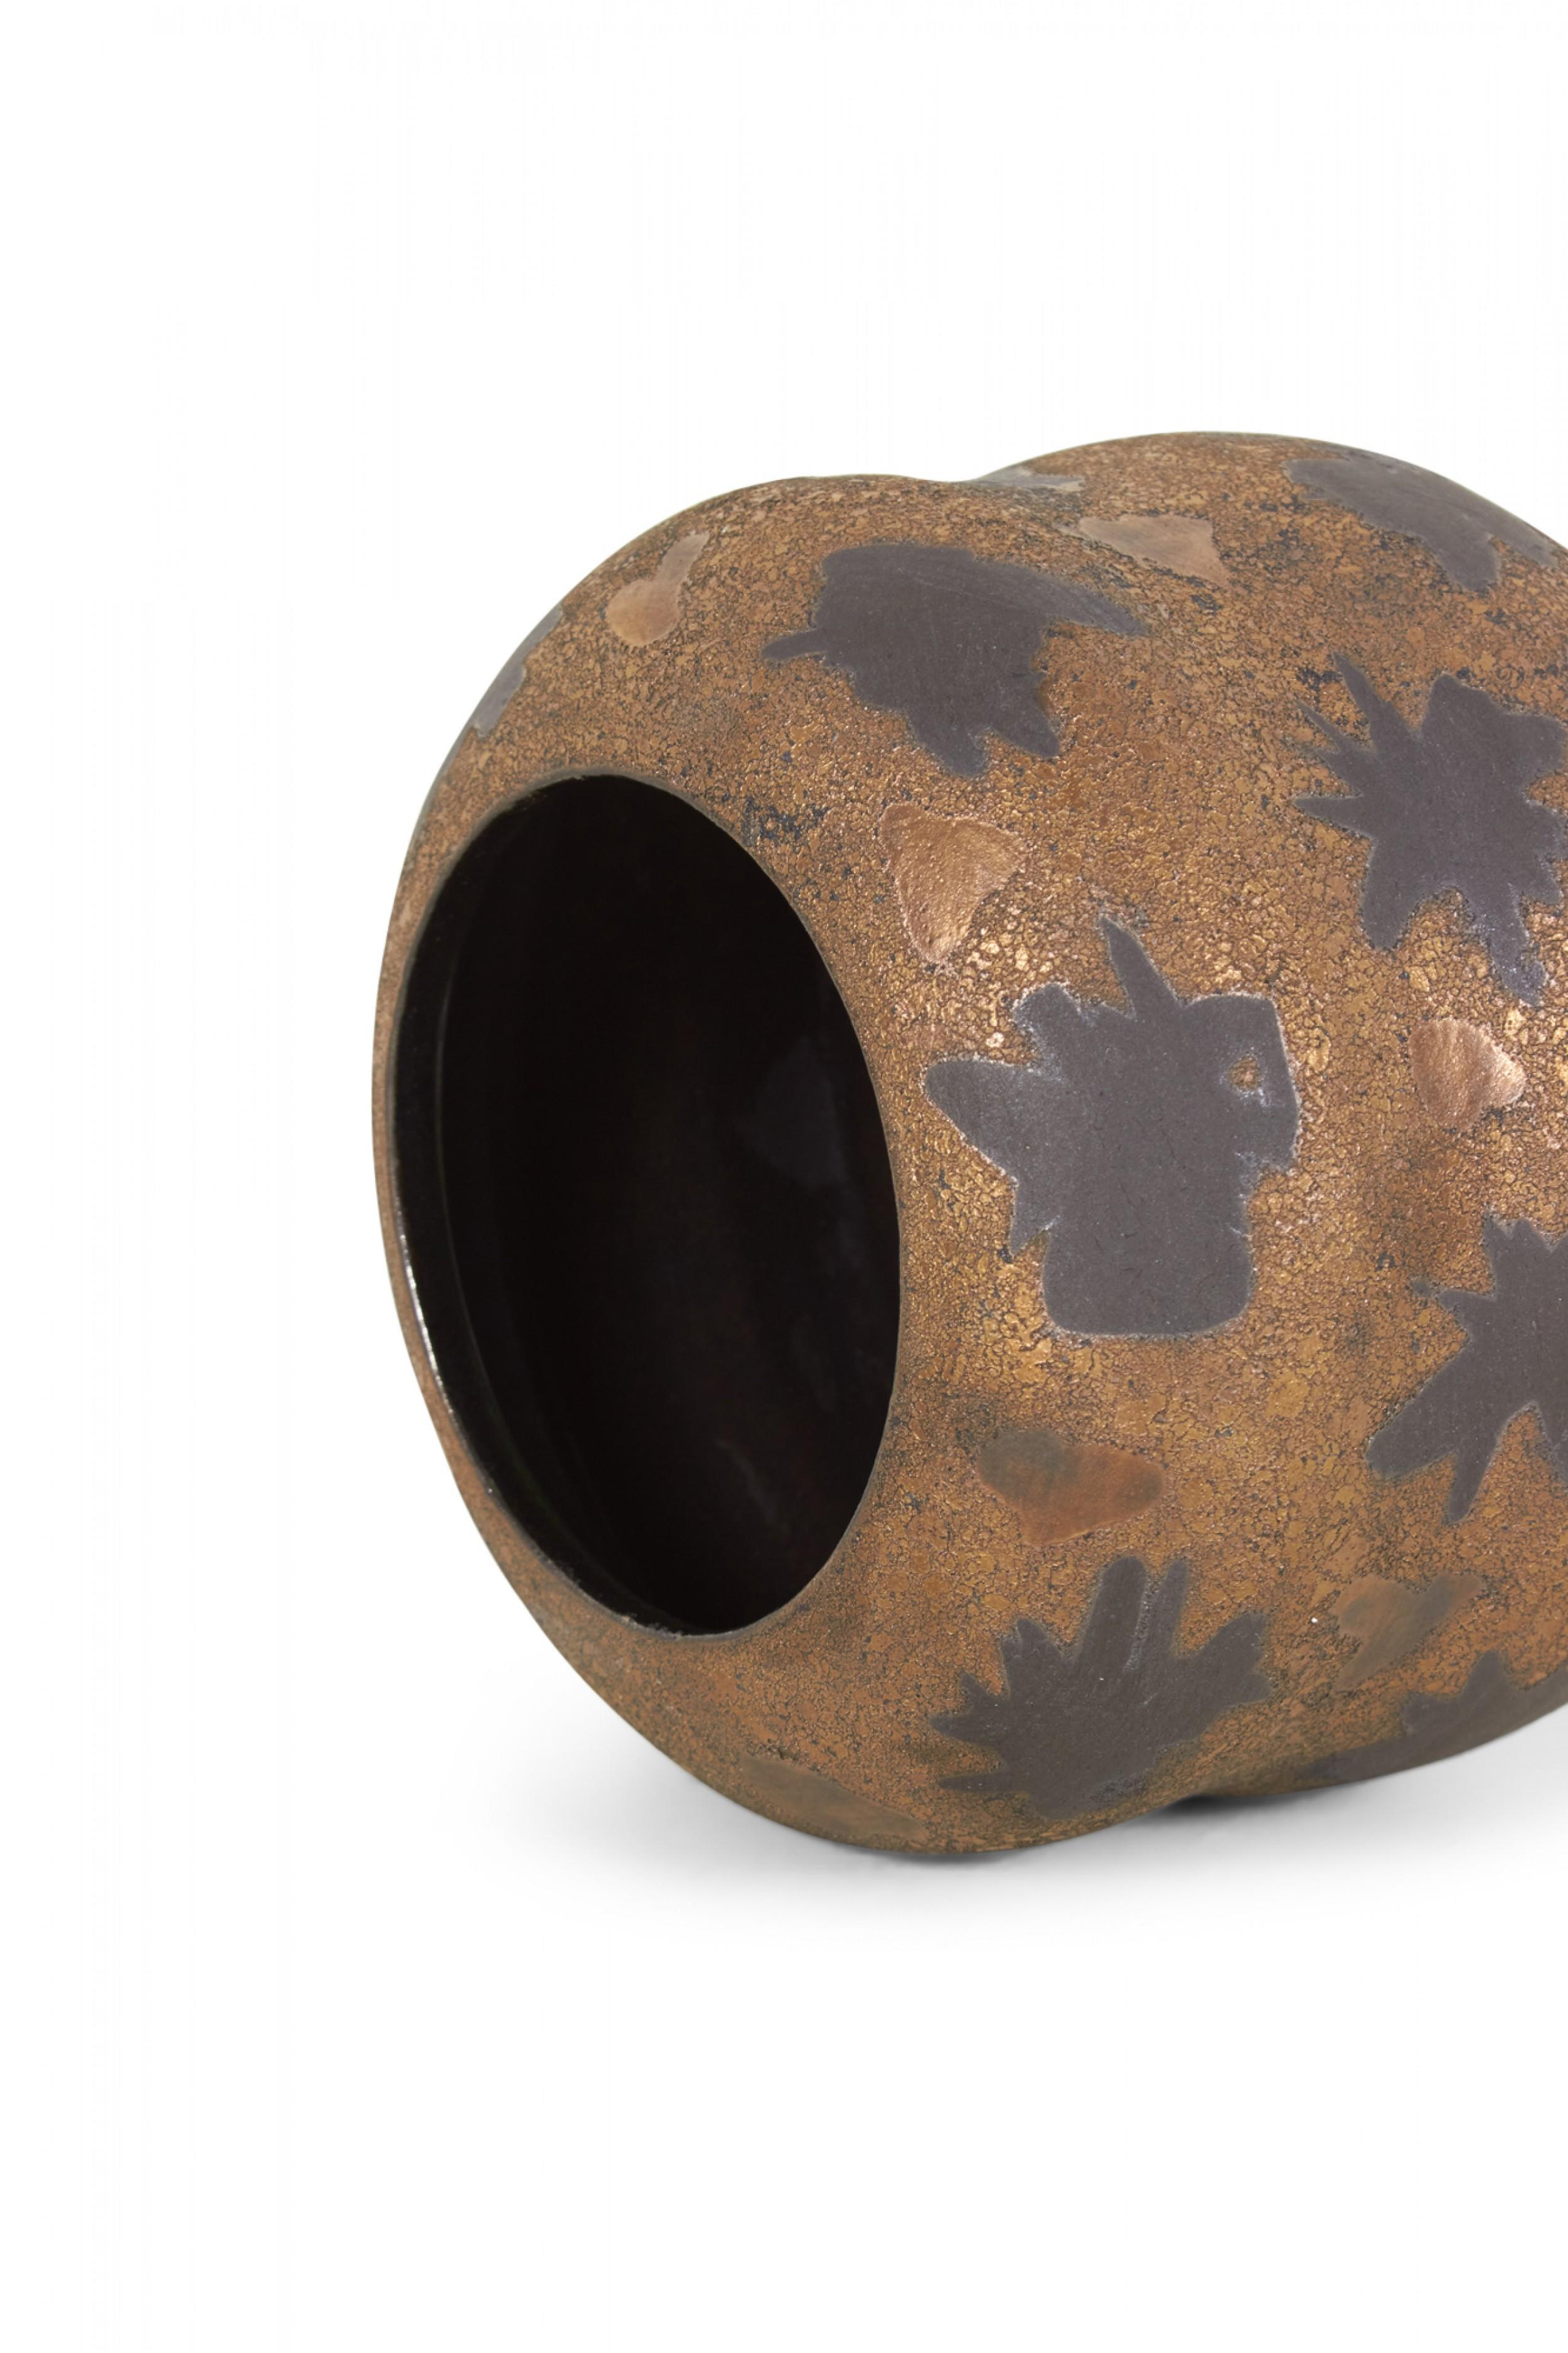 Gary DiPasquale Contemporary Bronze Texture and Black Starburst Patterned Curved For Sale 2